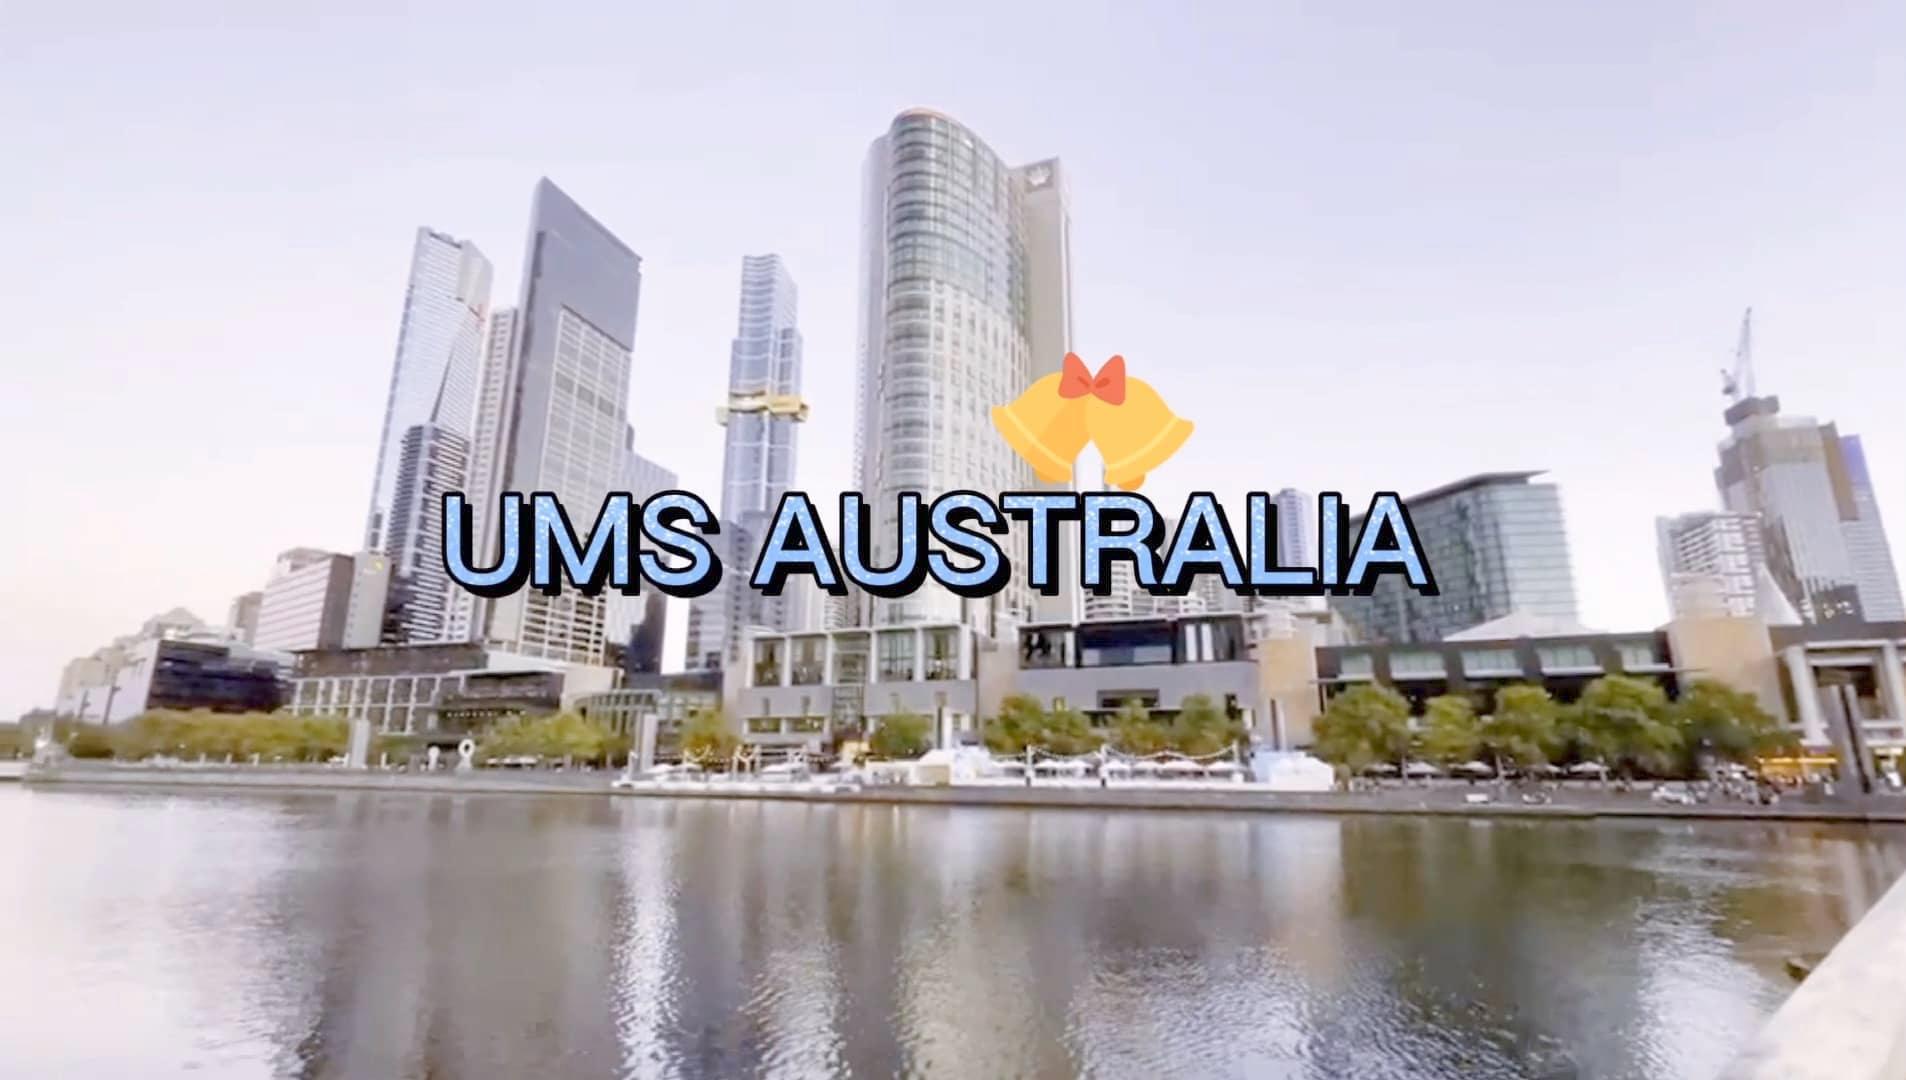 Holiday Greetings from UMS Australia